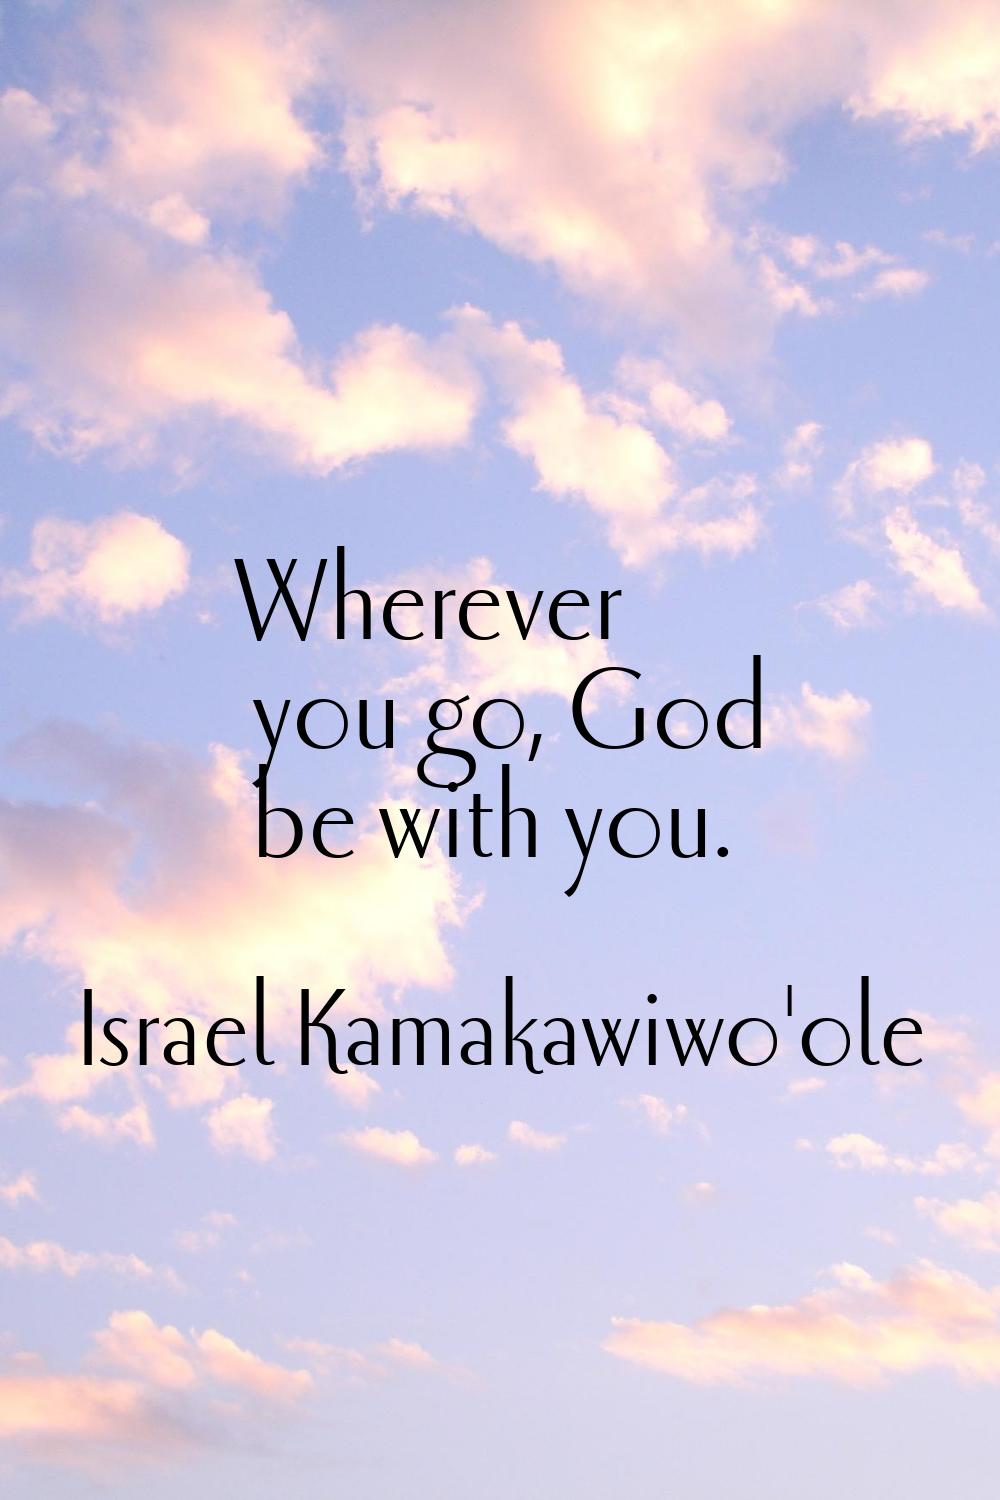 Wherever you go, God be with you.